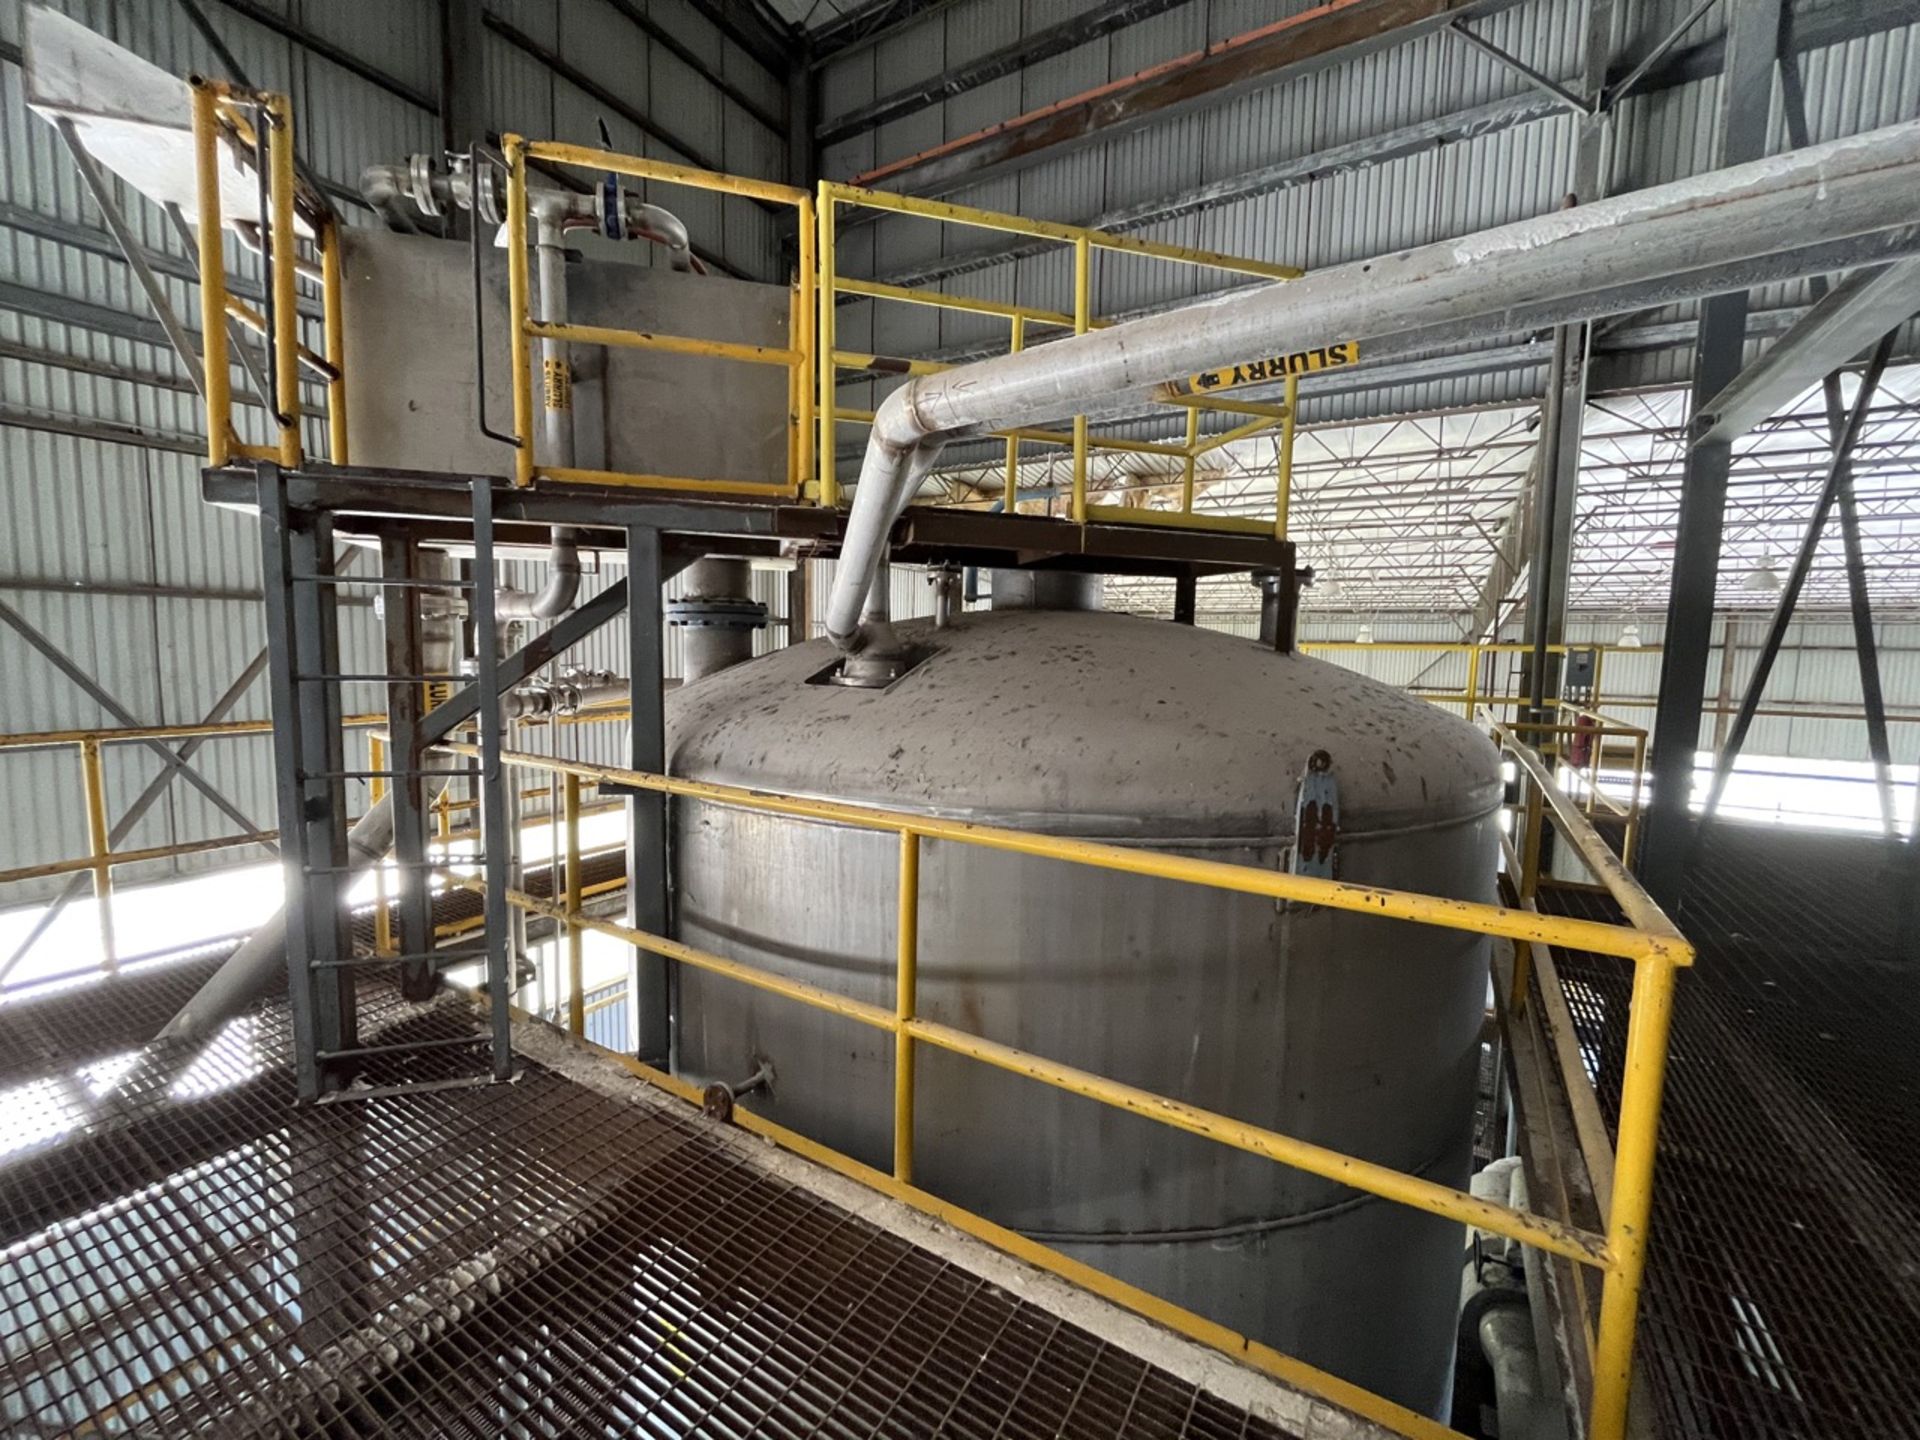 Conical storage tank with stainless steel toriesferica lid measures approximately 4.30 meters in di - Image 33 of 37